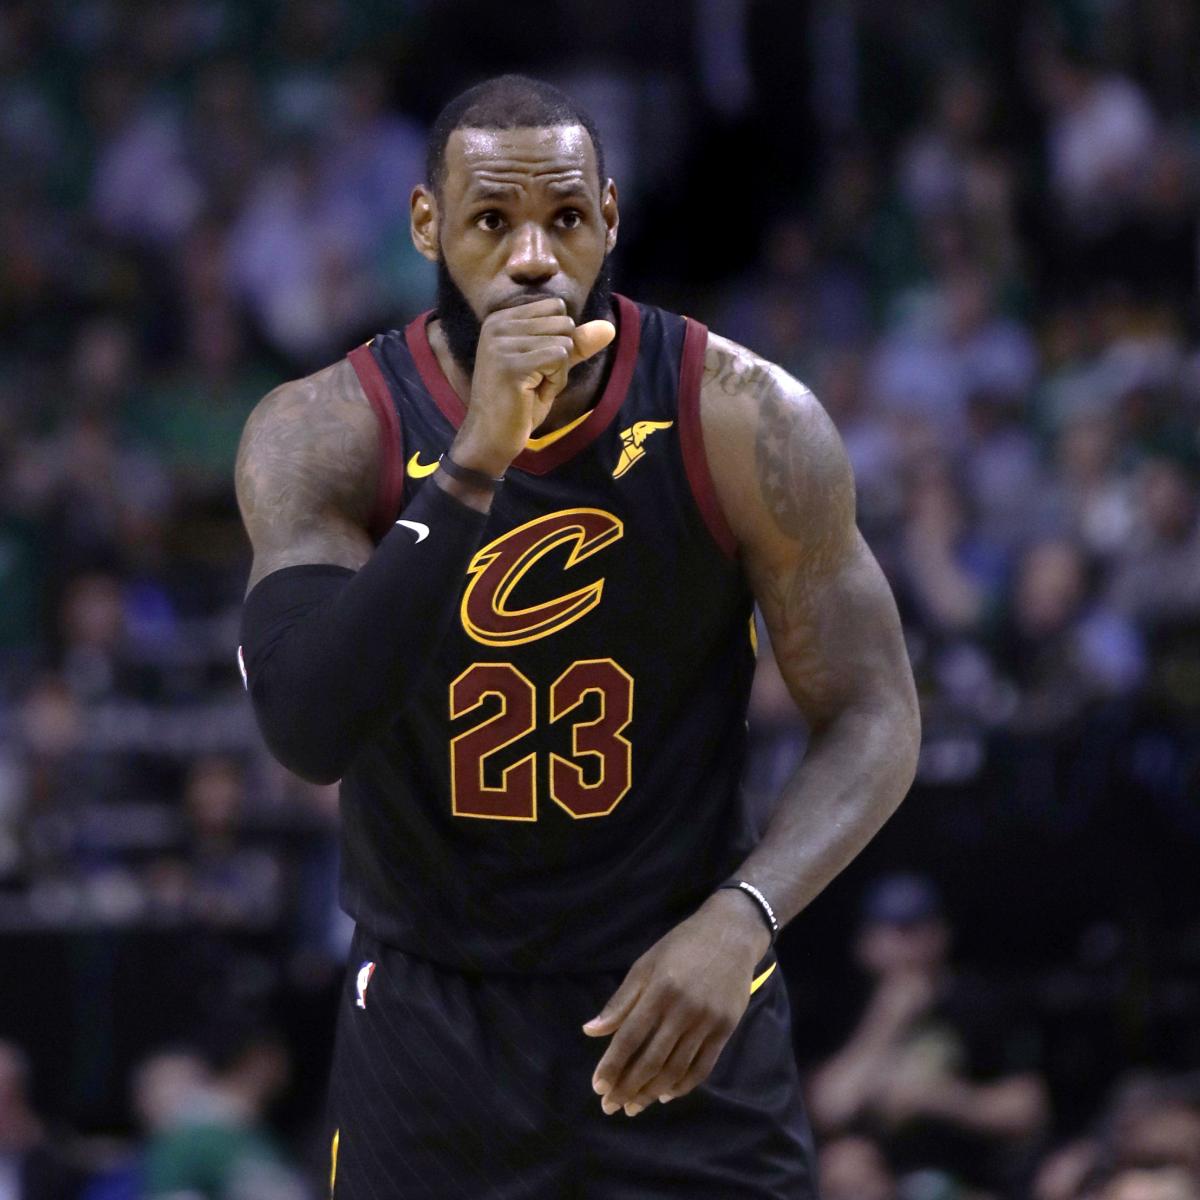 LeBron James named to All-NBA First Team - Fear The Sword